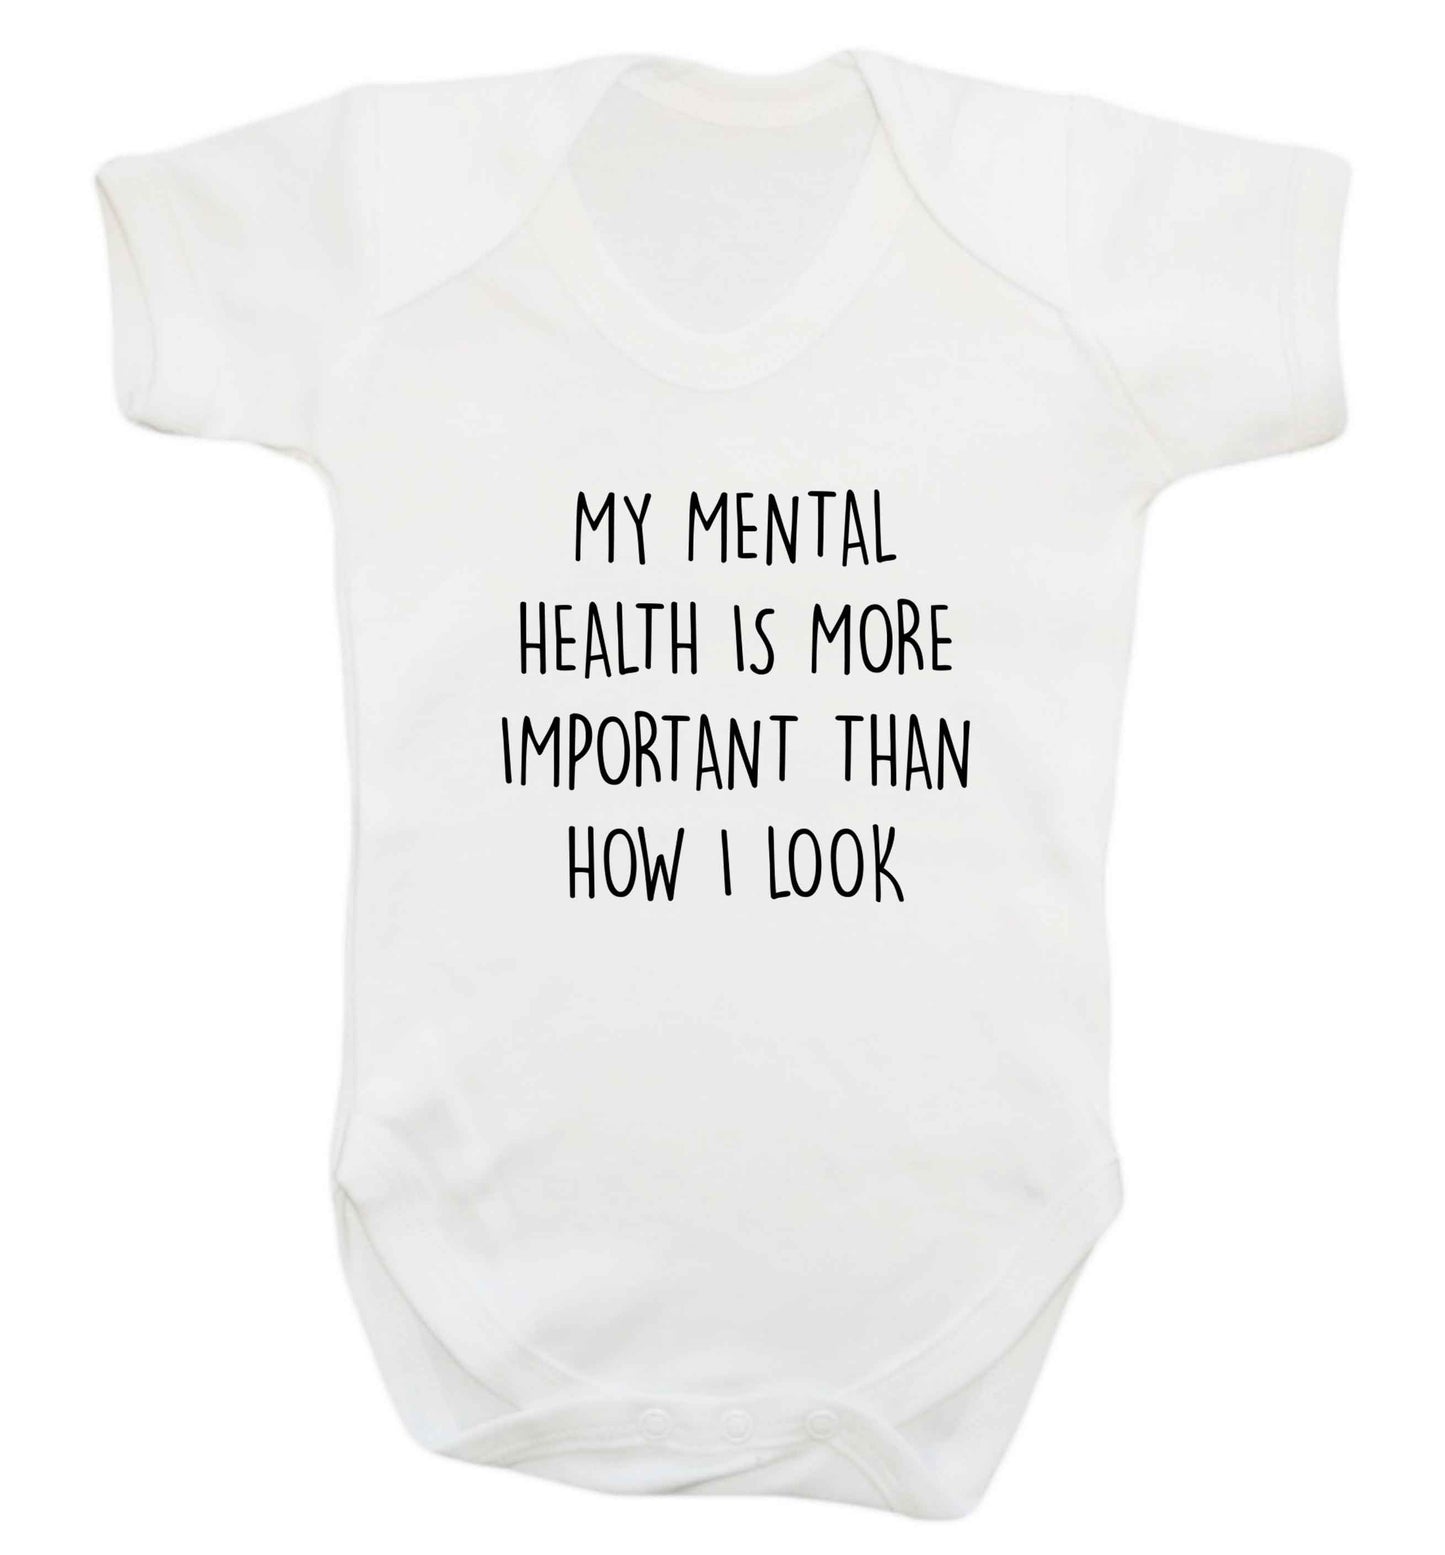 My mental health is more importnat than how I look baby vest white 18-24 months